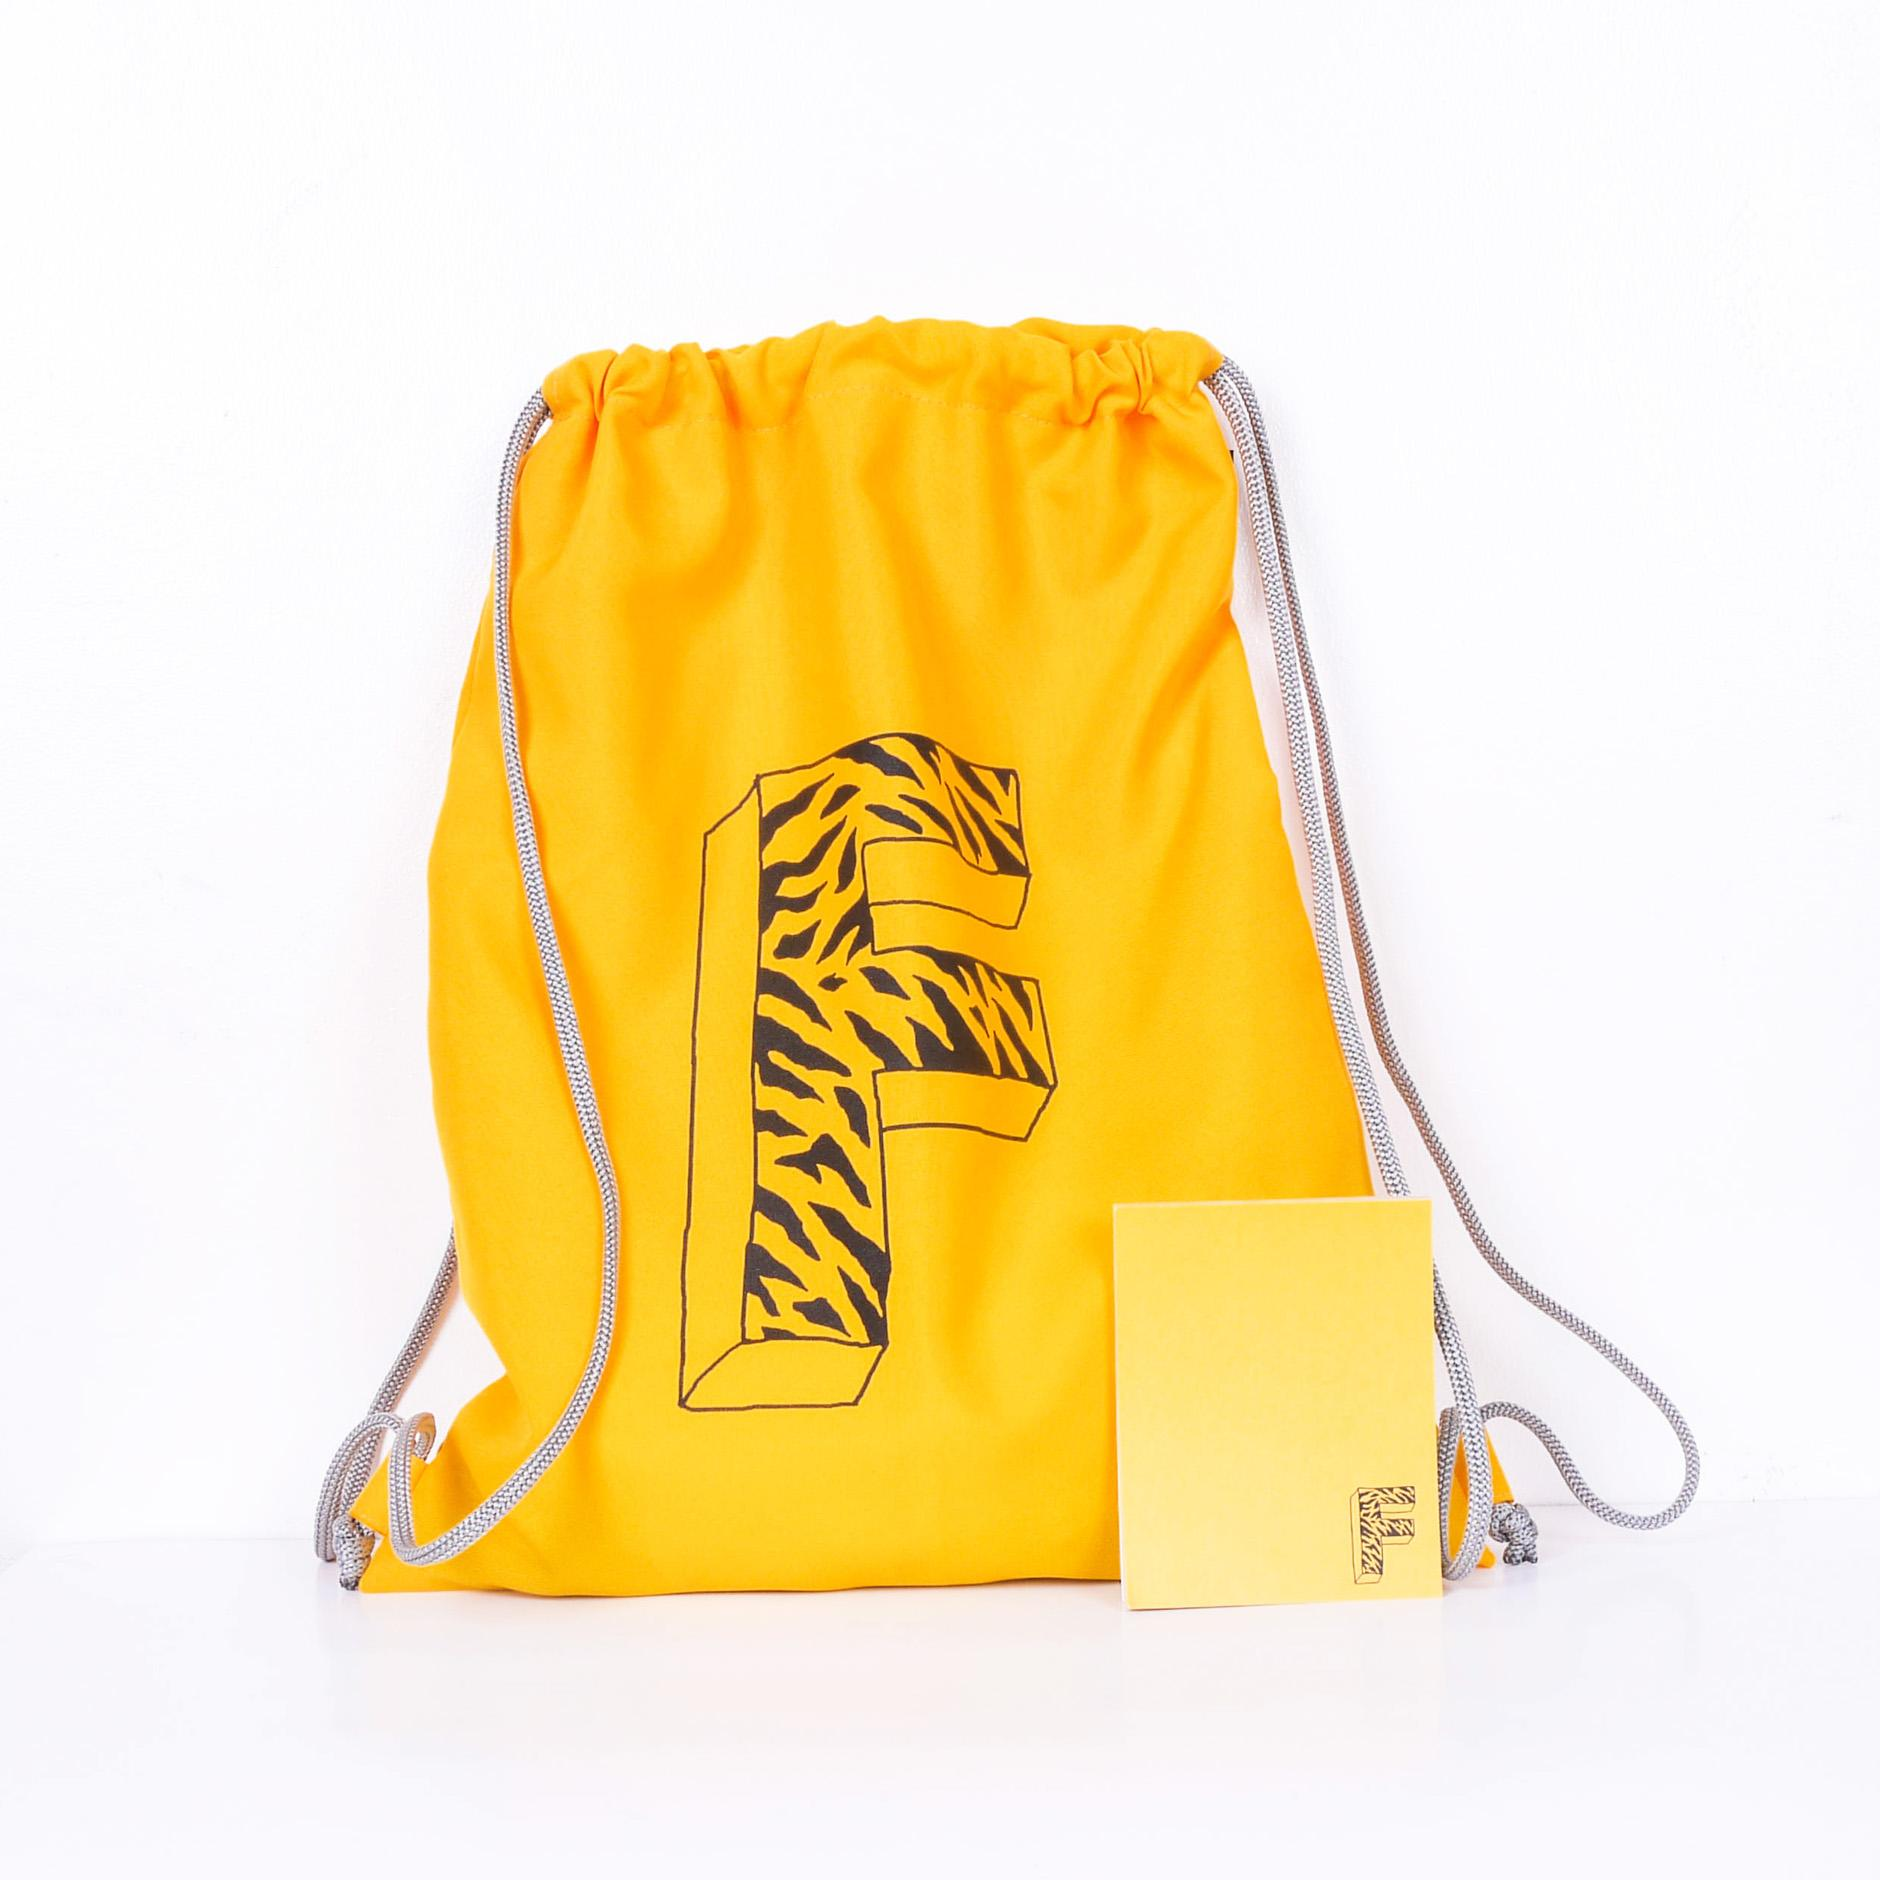 string bags online